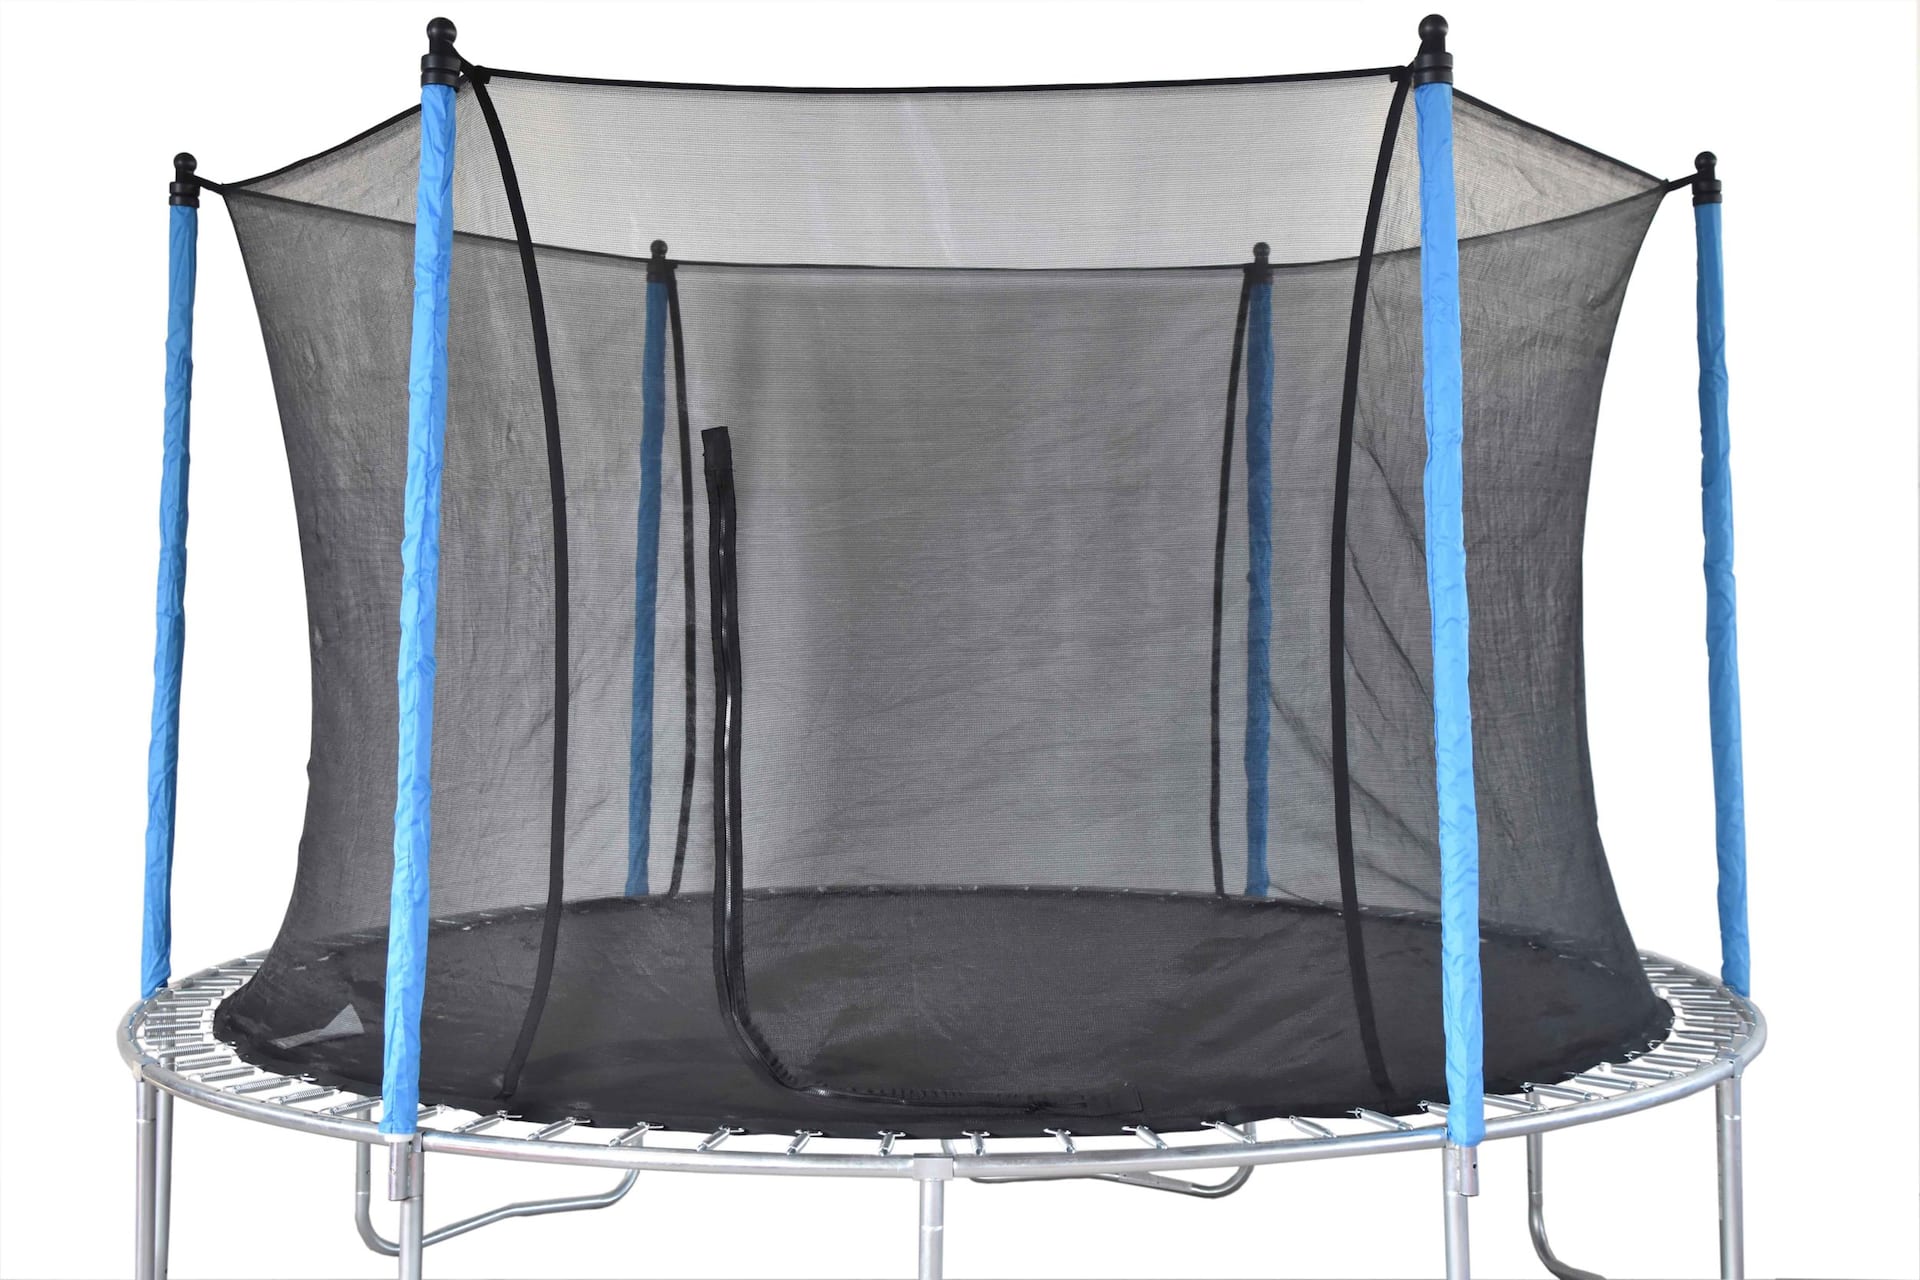 Upper Bounce Round Trampoline Set with Safety Enclosure System